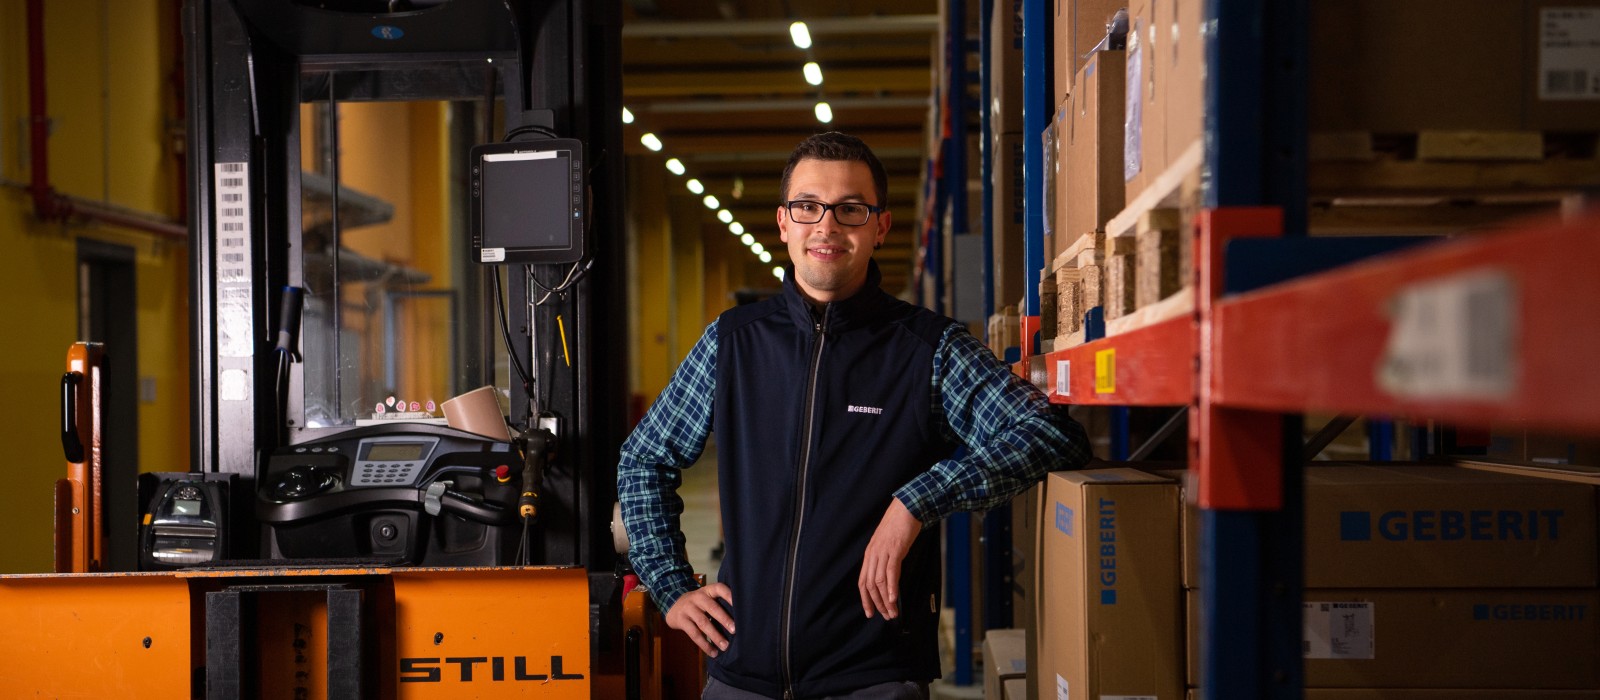 Stefan Matheis works as a communication point between logistics and IT in group logistics in the German Pfullendorf.